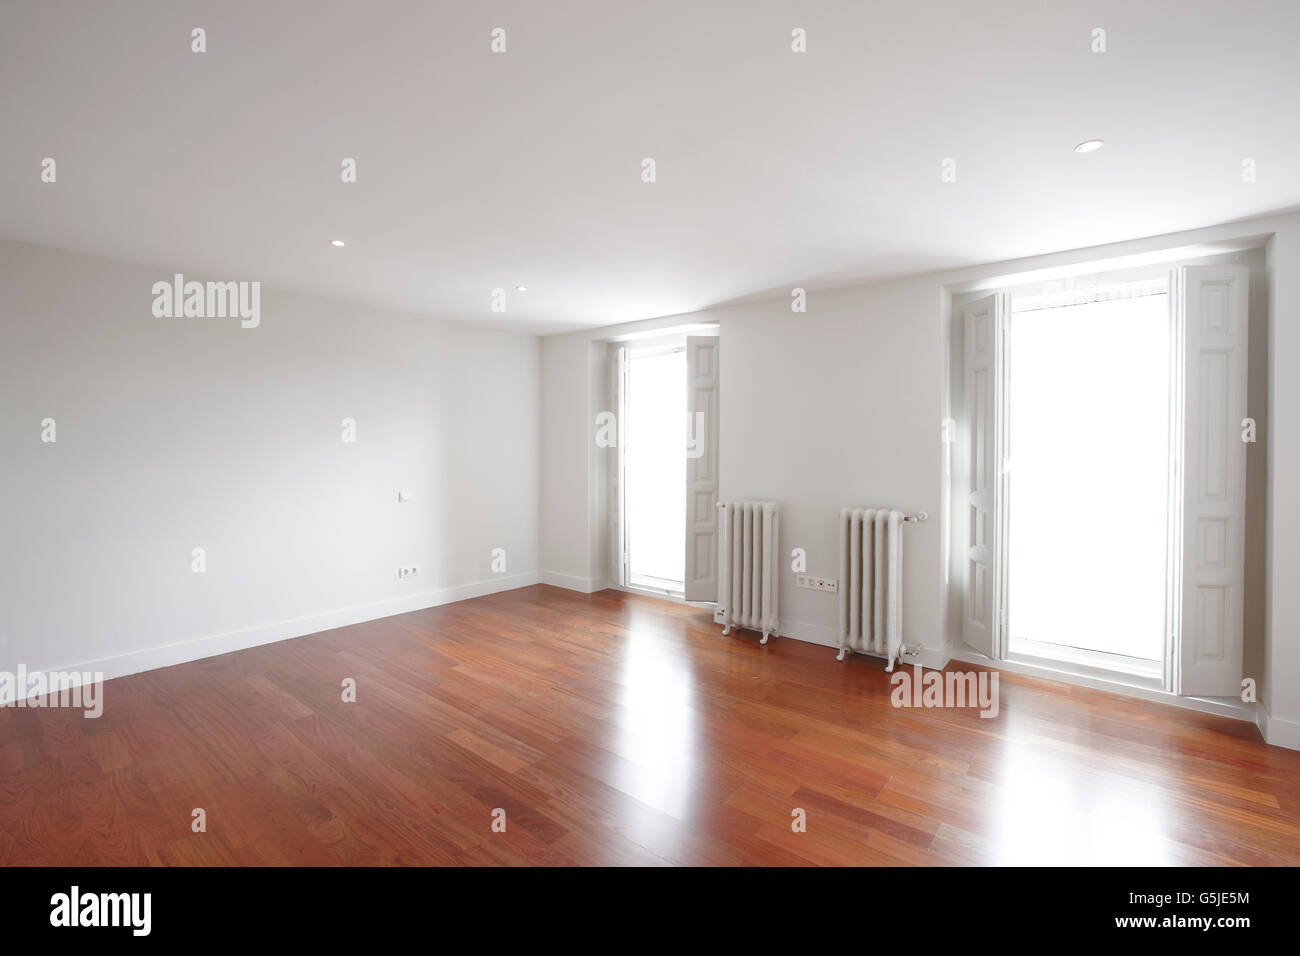 House empty room with classic iron heaters. Horizontal format Stock Photo